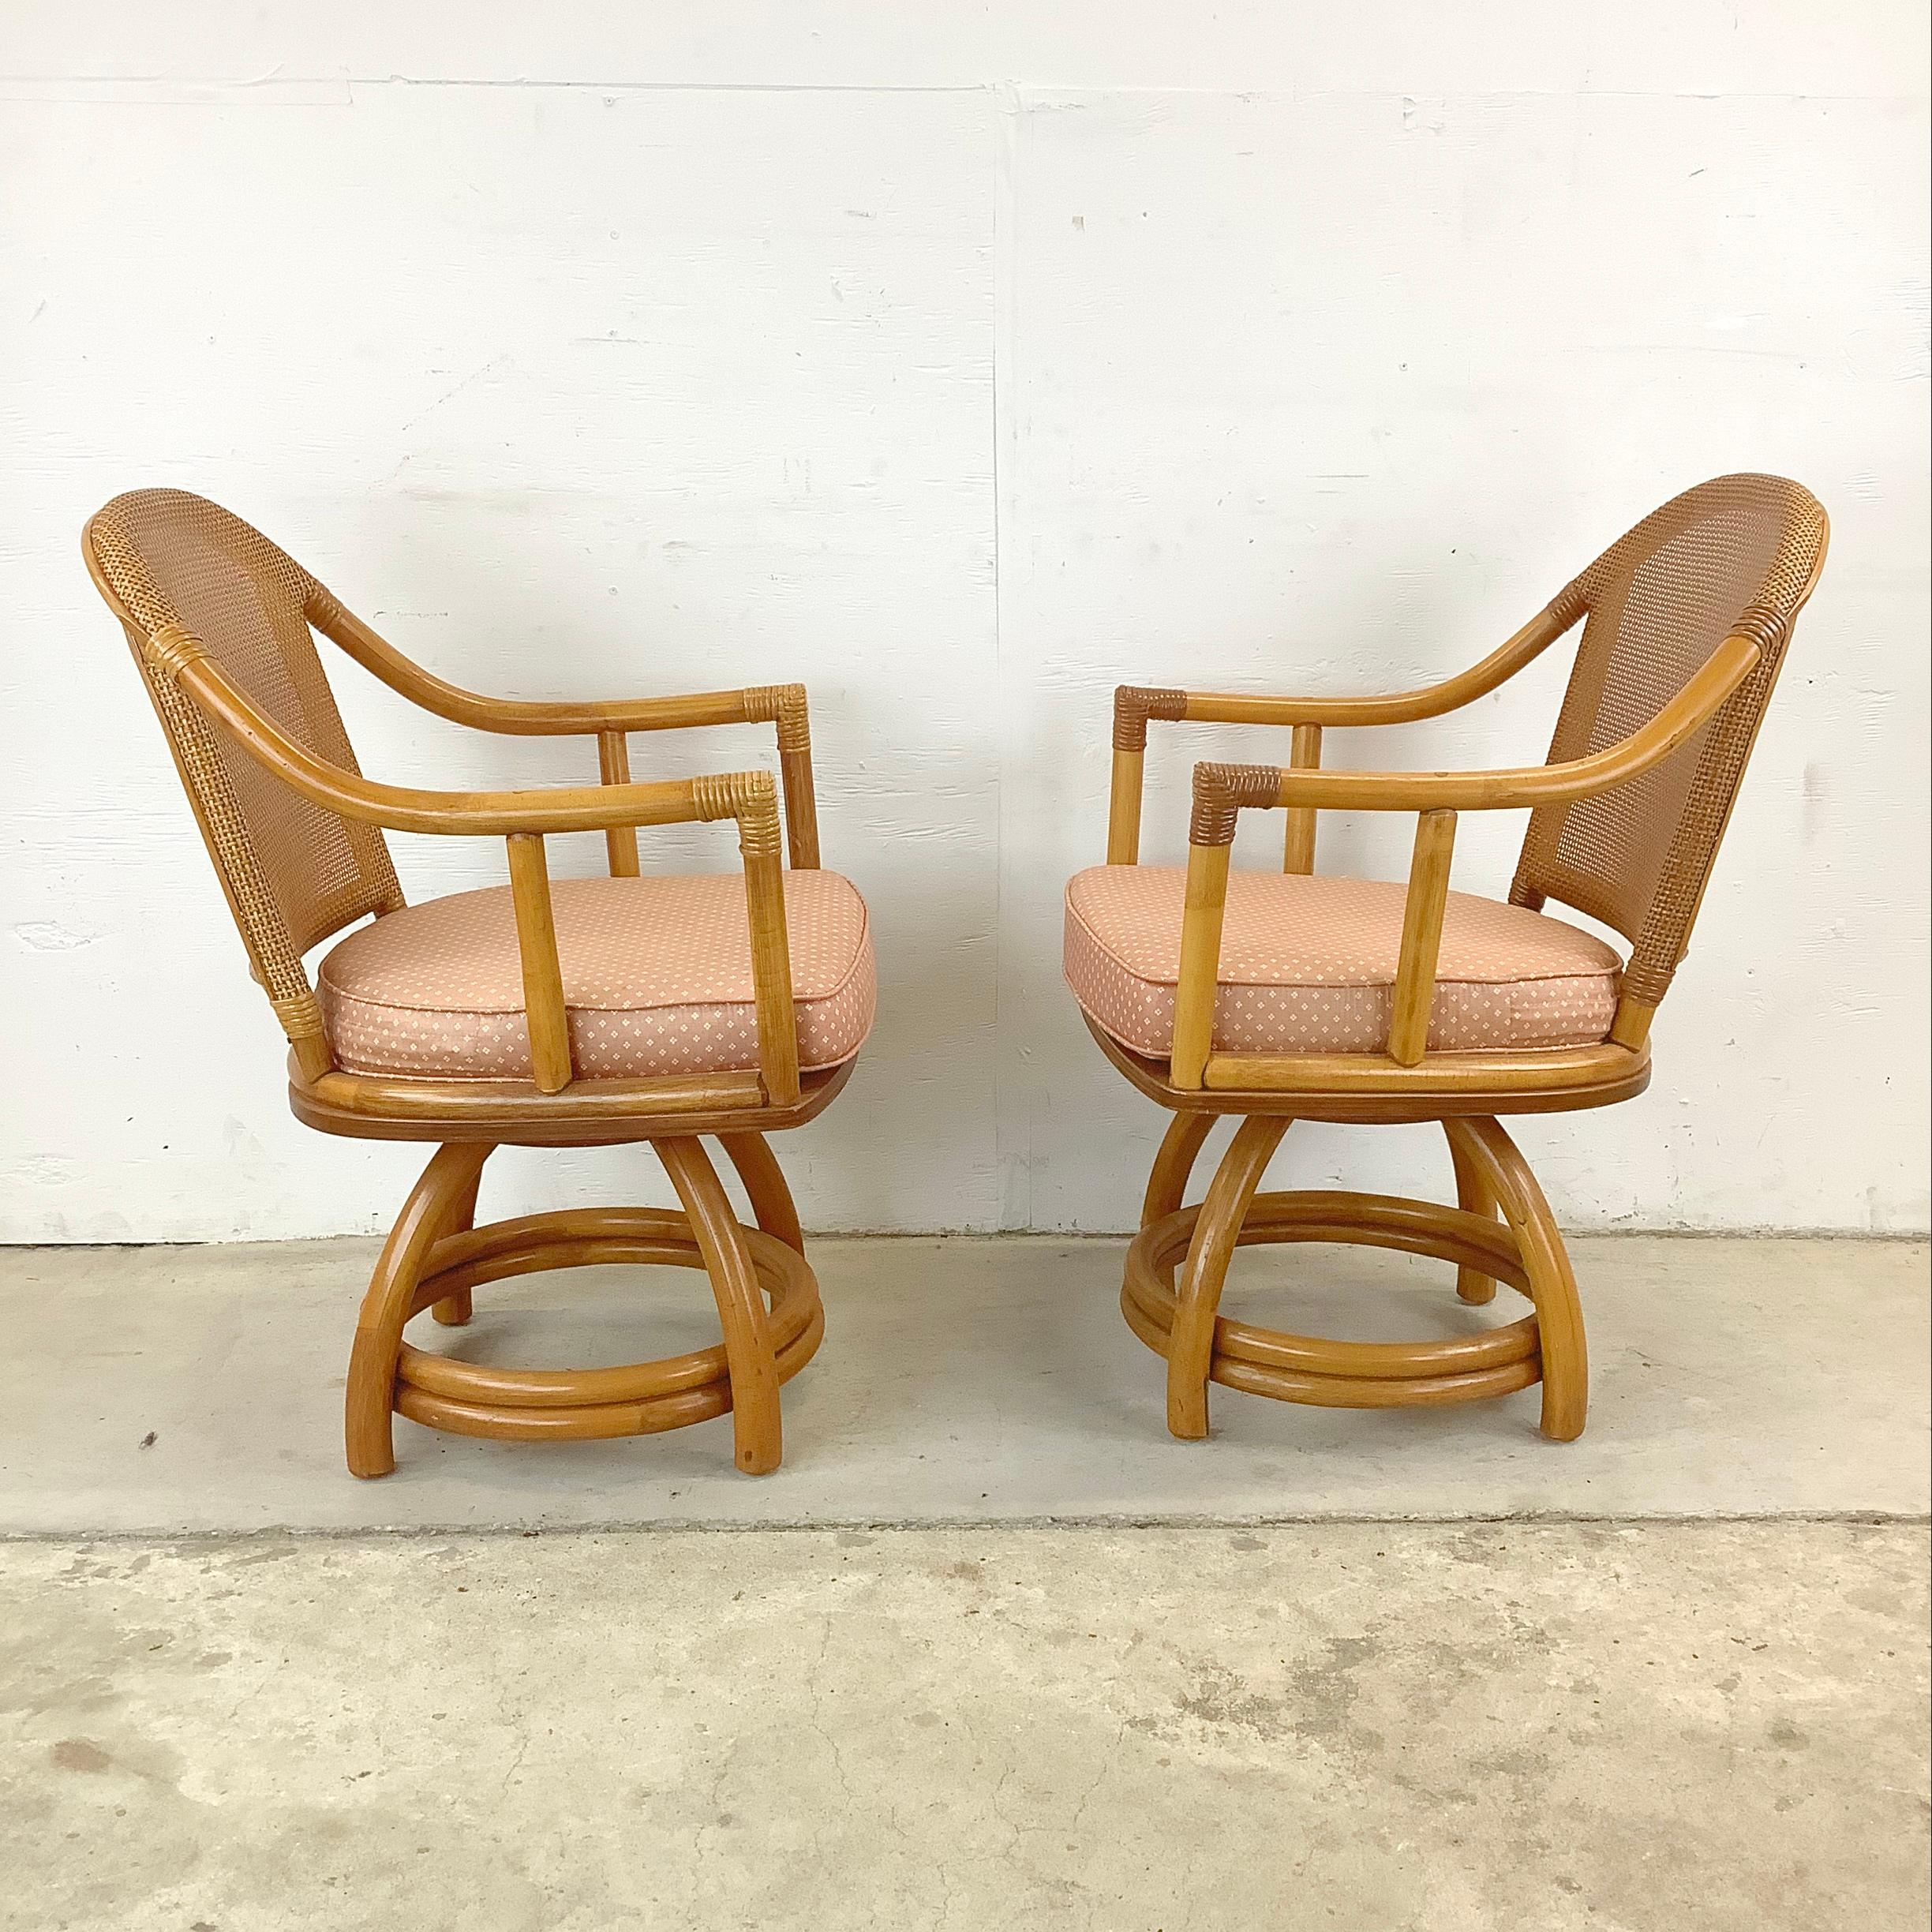 Bohemian Vintage Rattan Swivel Chairs after Ficks Reed- set 4 For Sale